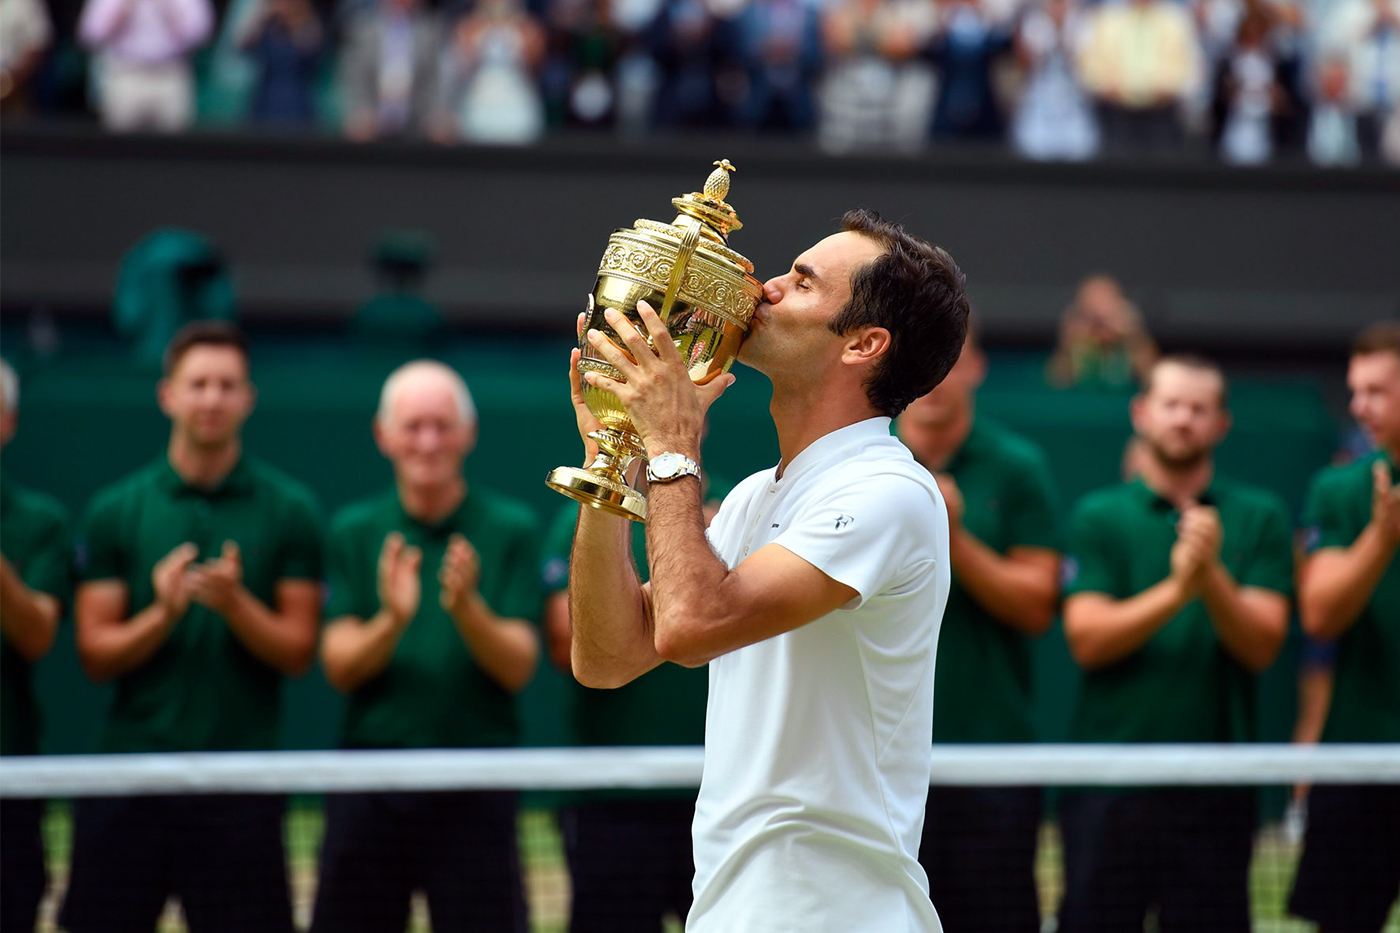 2017 Wimbledon – Roger Federer Beats Marin Cilic to Seal Record Eighth Title